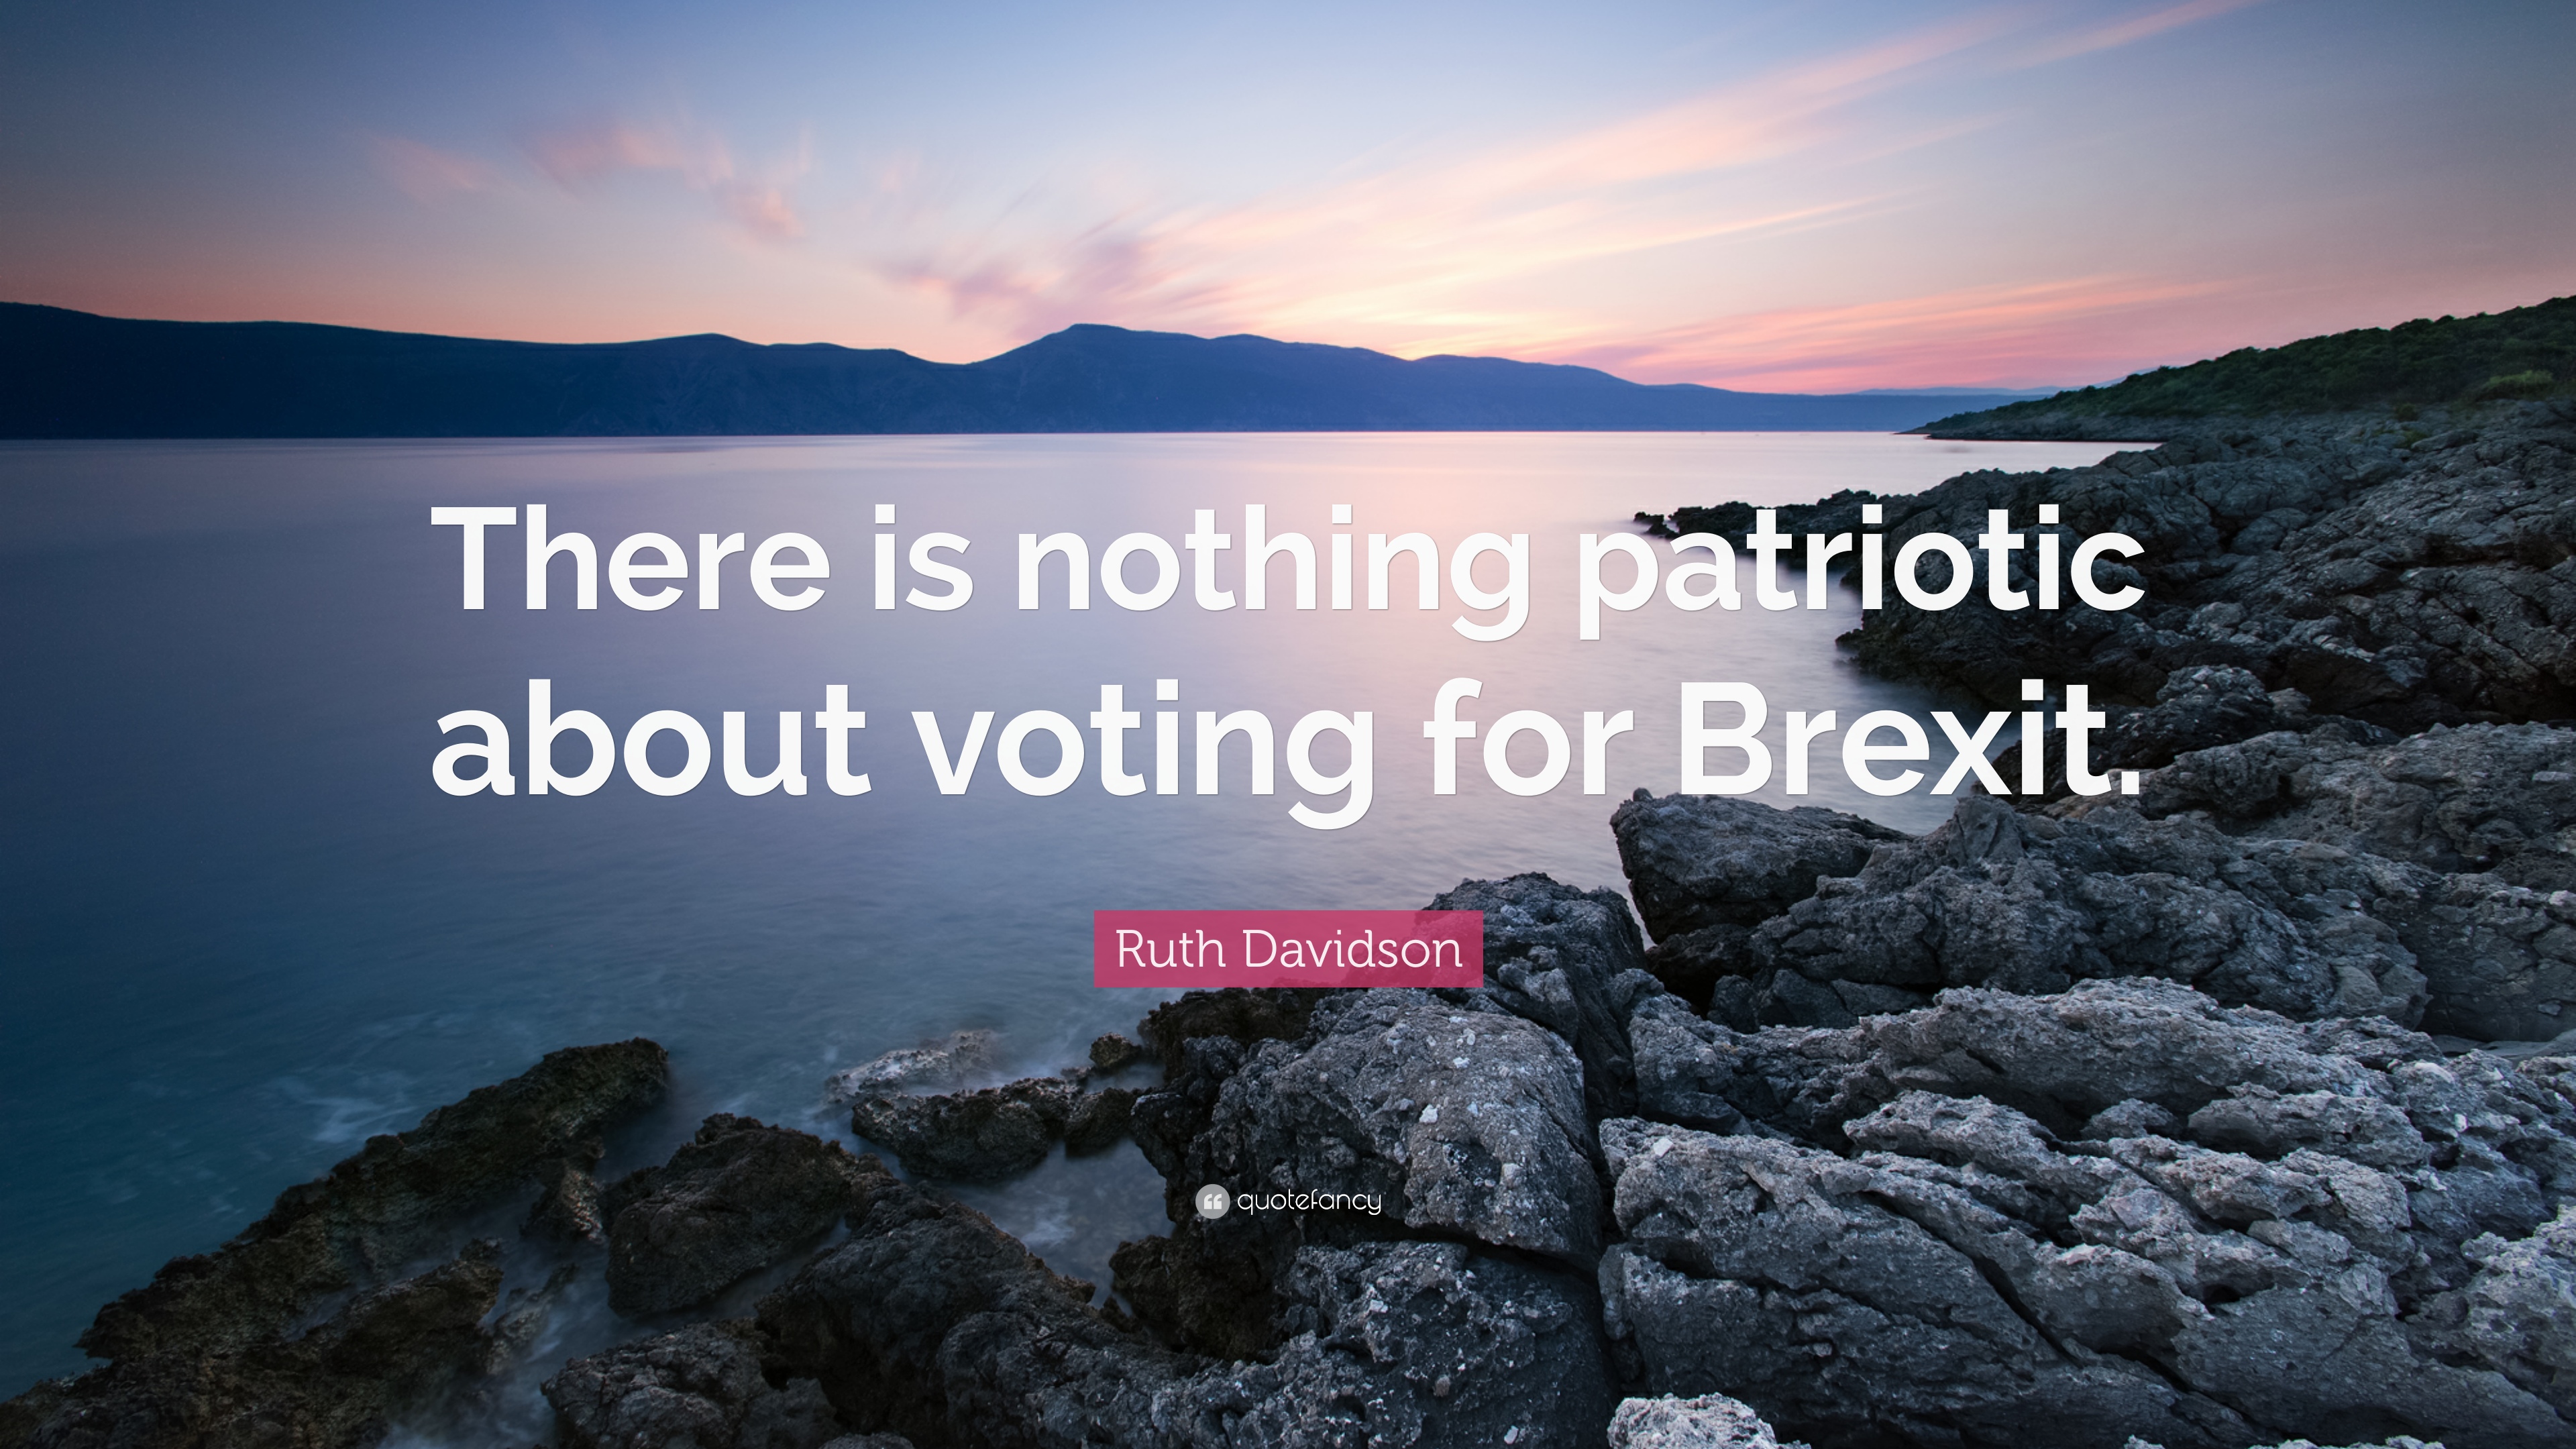 Ruth Davidson Quote: “There is nothing patriotic about